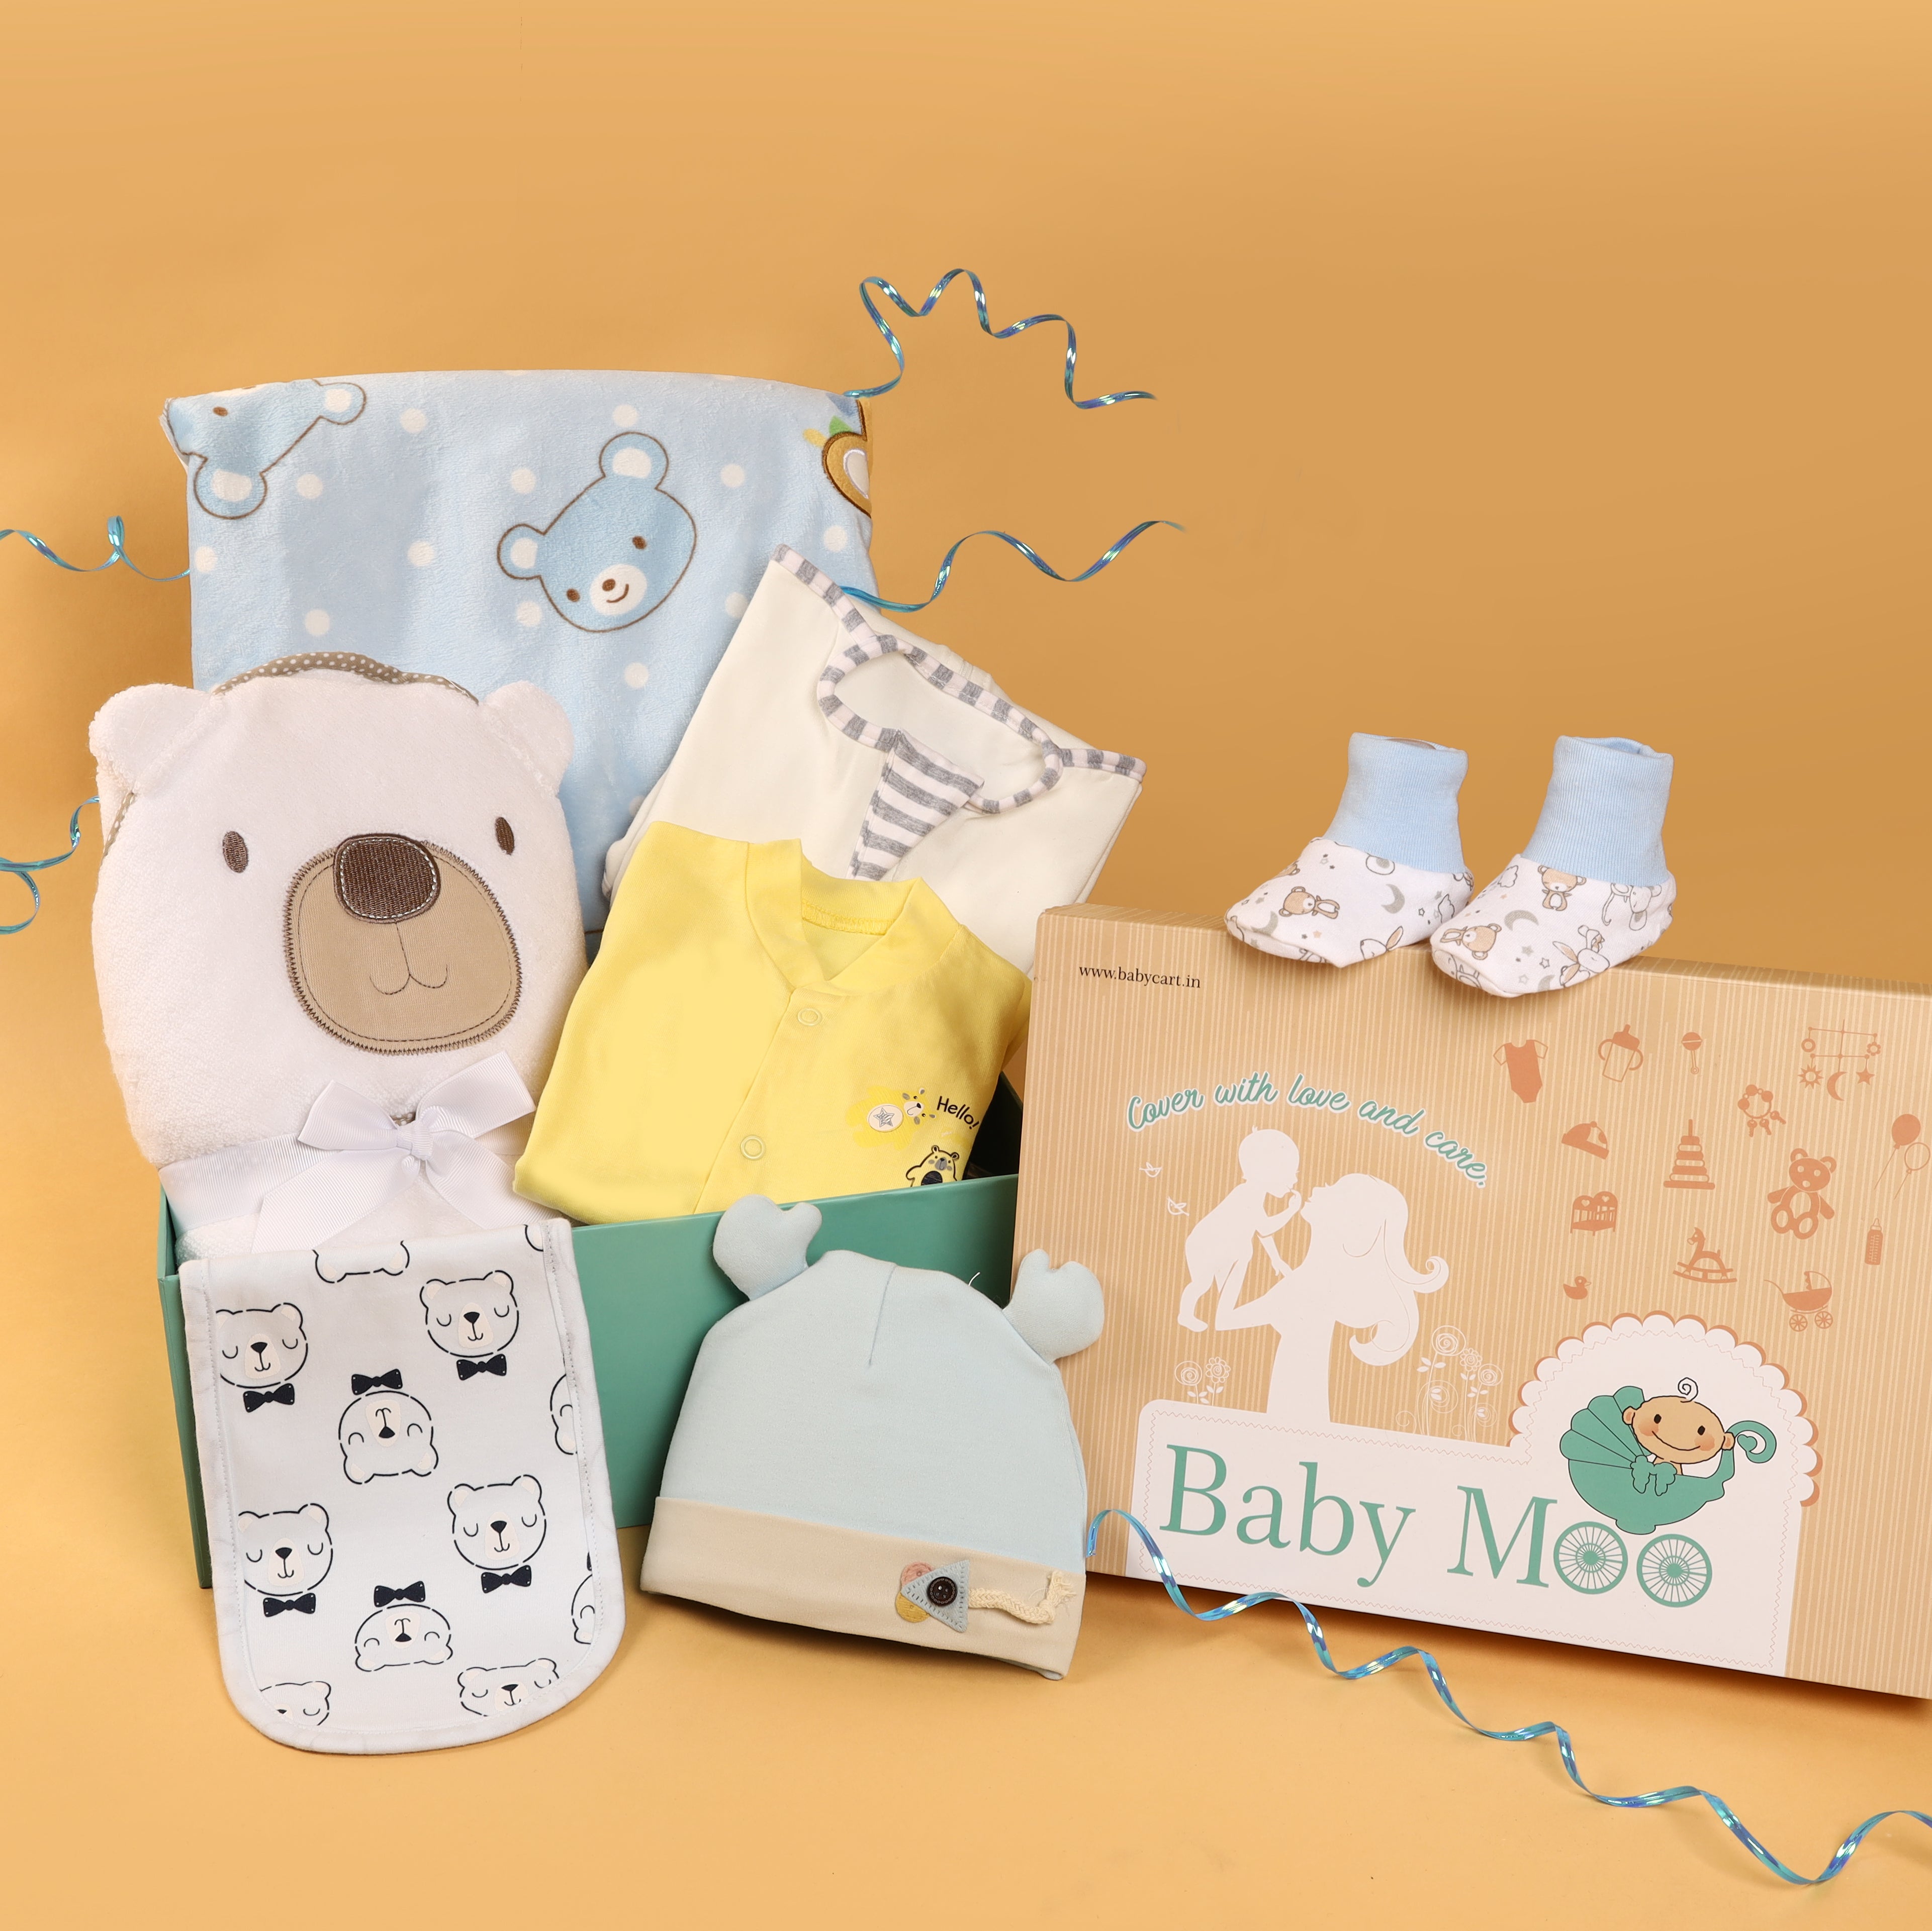 Amazon.com : New Baby Gift Set for Newborn Boy – 2 Blue Keepsake Boxes with Baby  Clothes, Teddy Bear and Newborn Essentials - New Baby Gift Basket for  Parents Makes a Unique